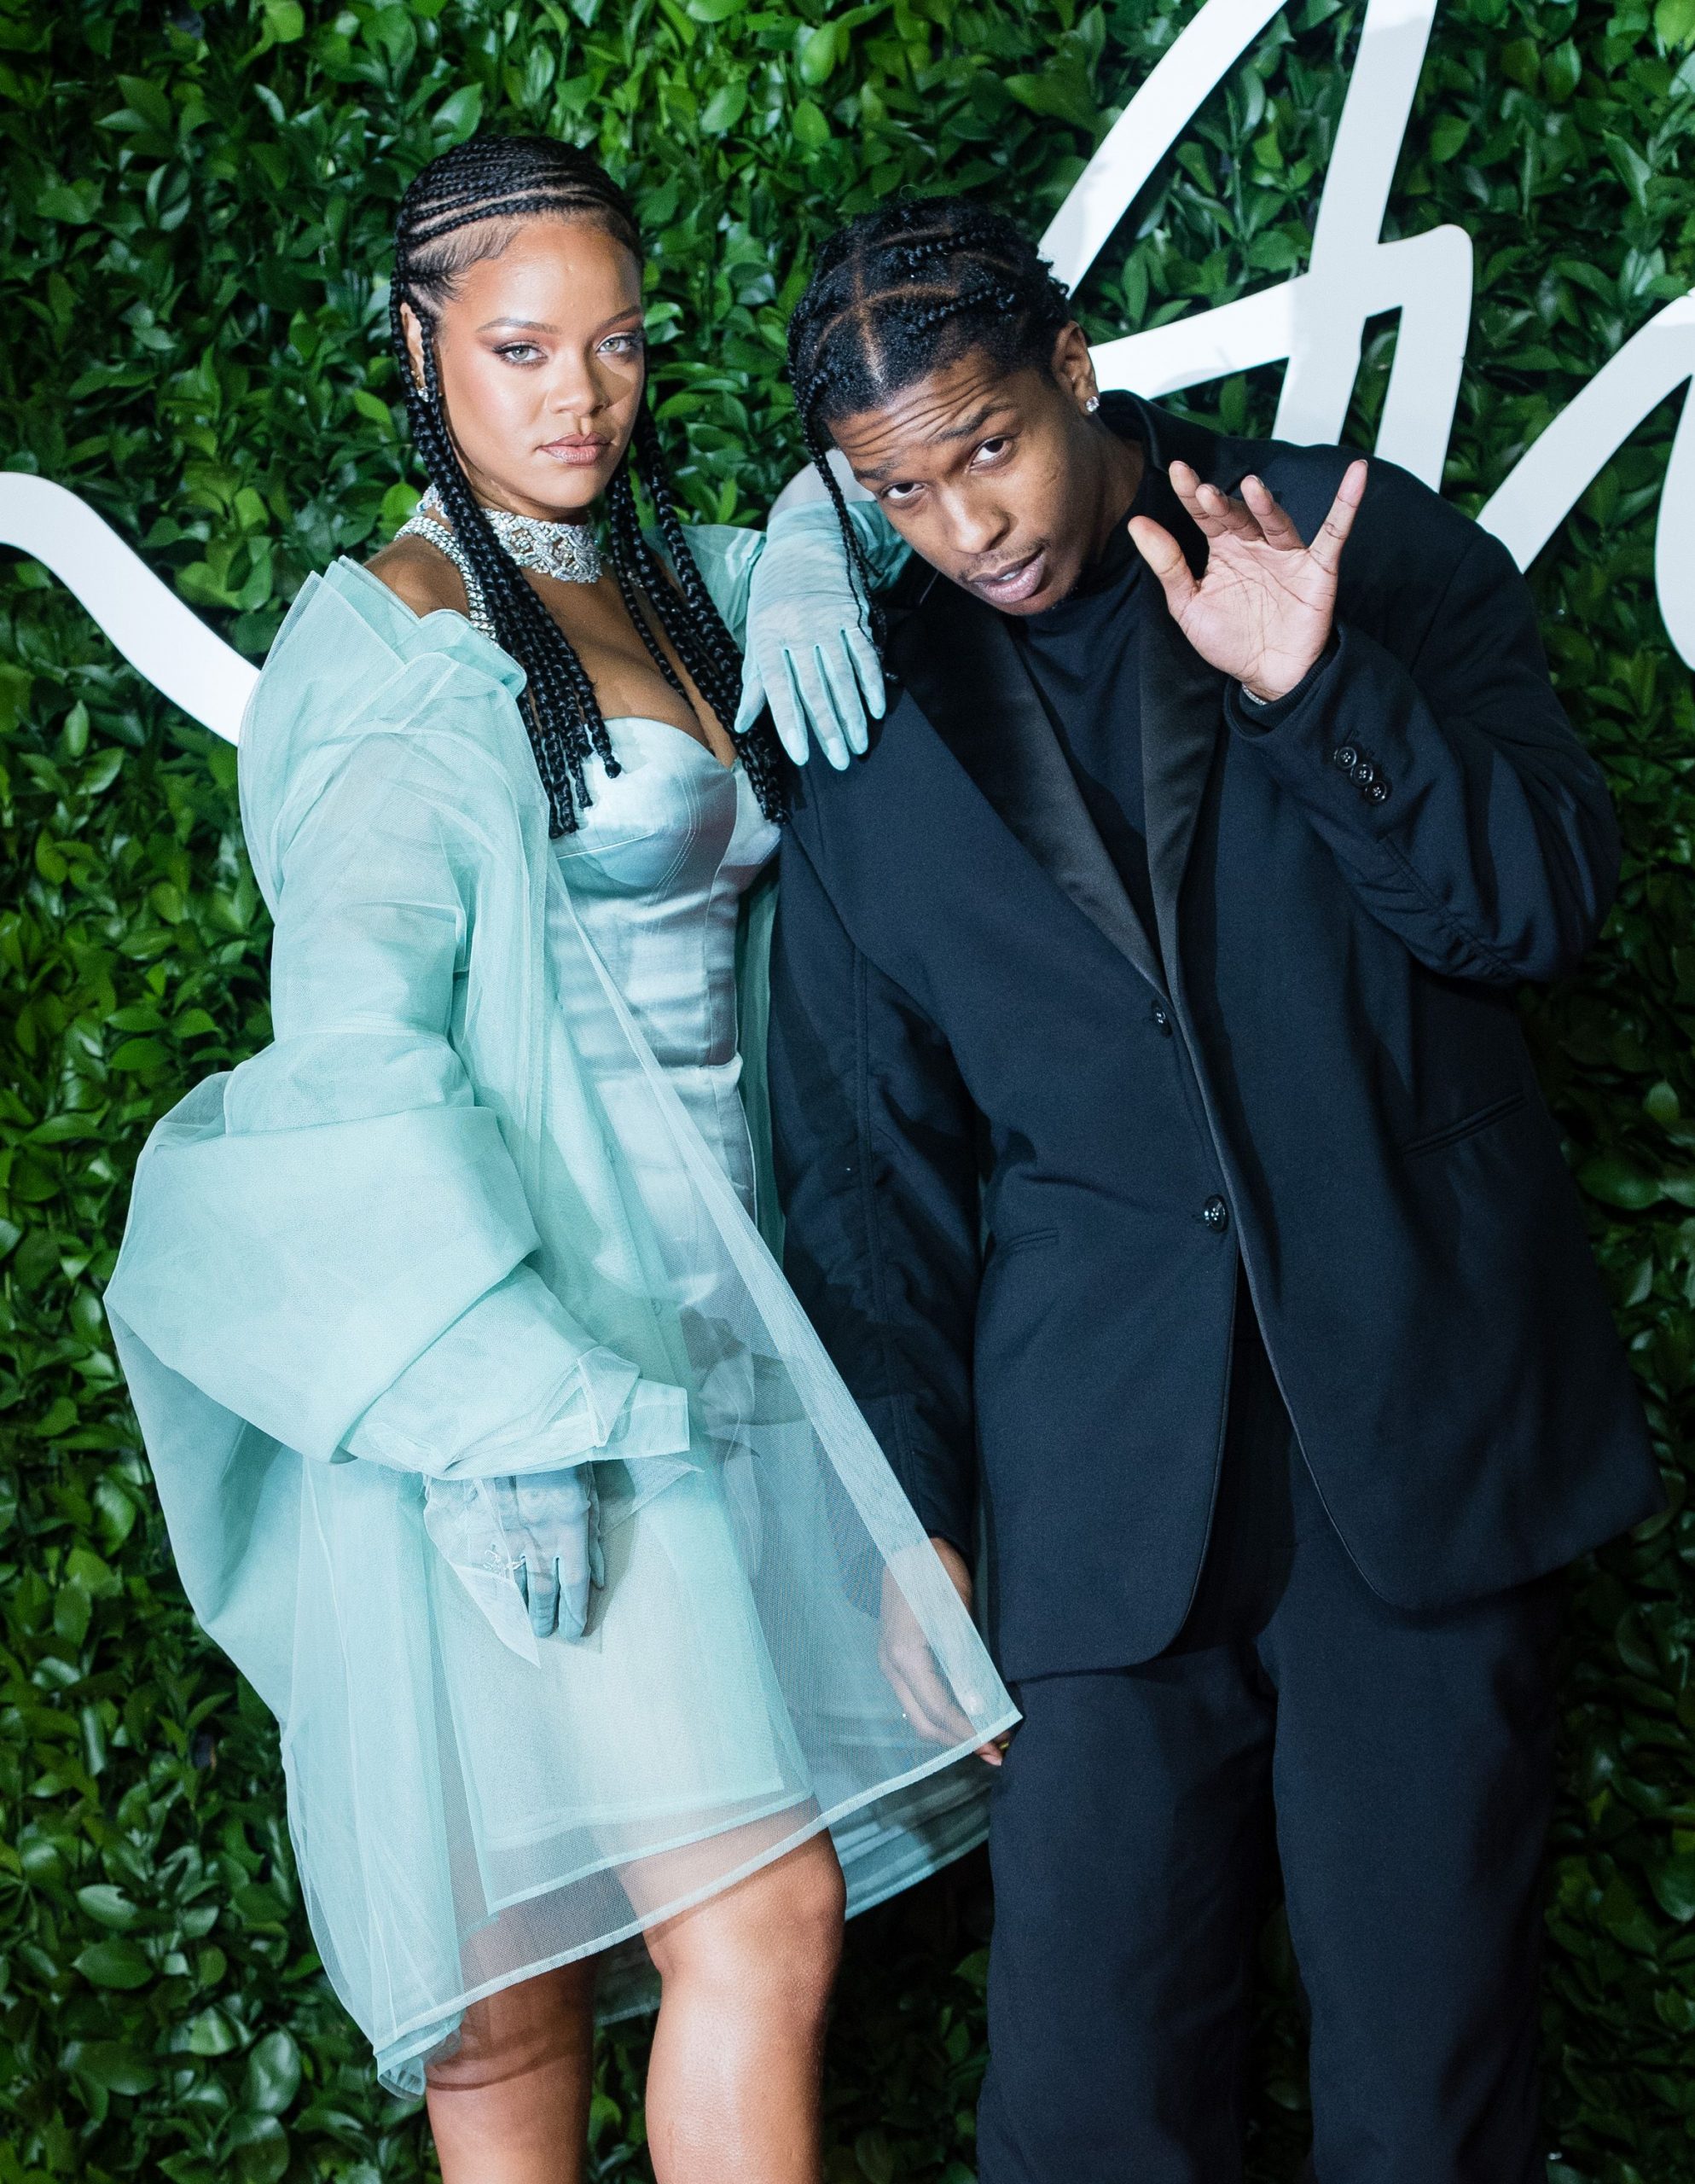 Rihanna And ASAP Rocky Age Difference: Who Is Older?